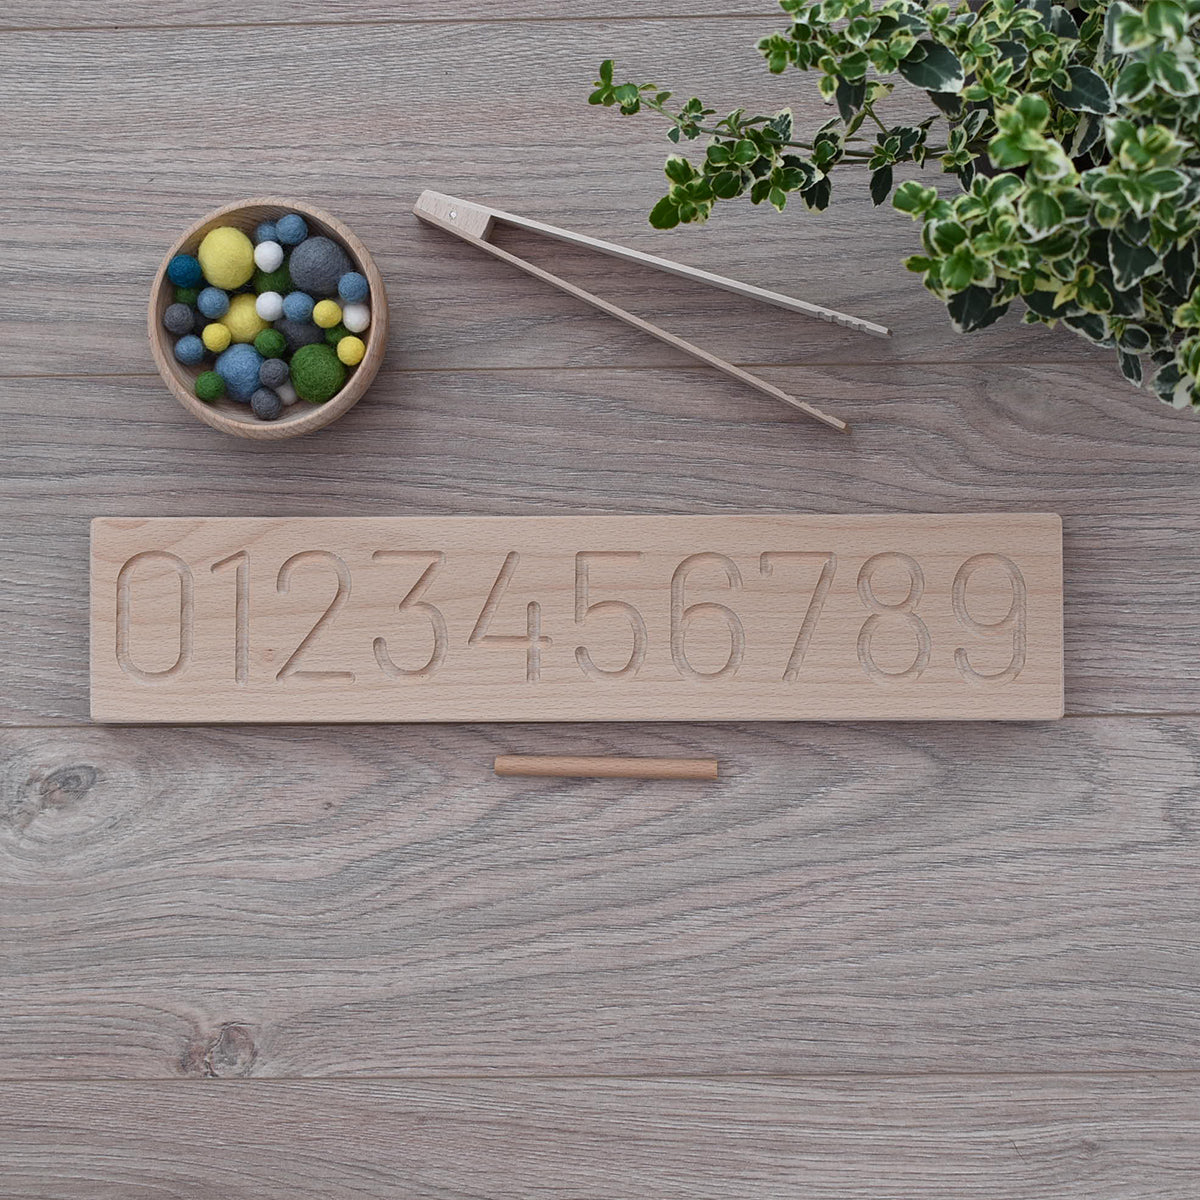 UK made wooden number board for sensory play and fine motor skills, made from sustainable Beech